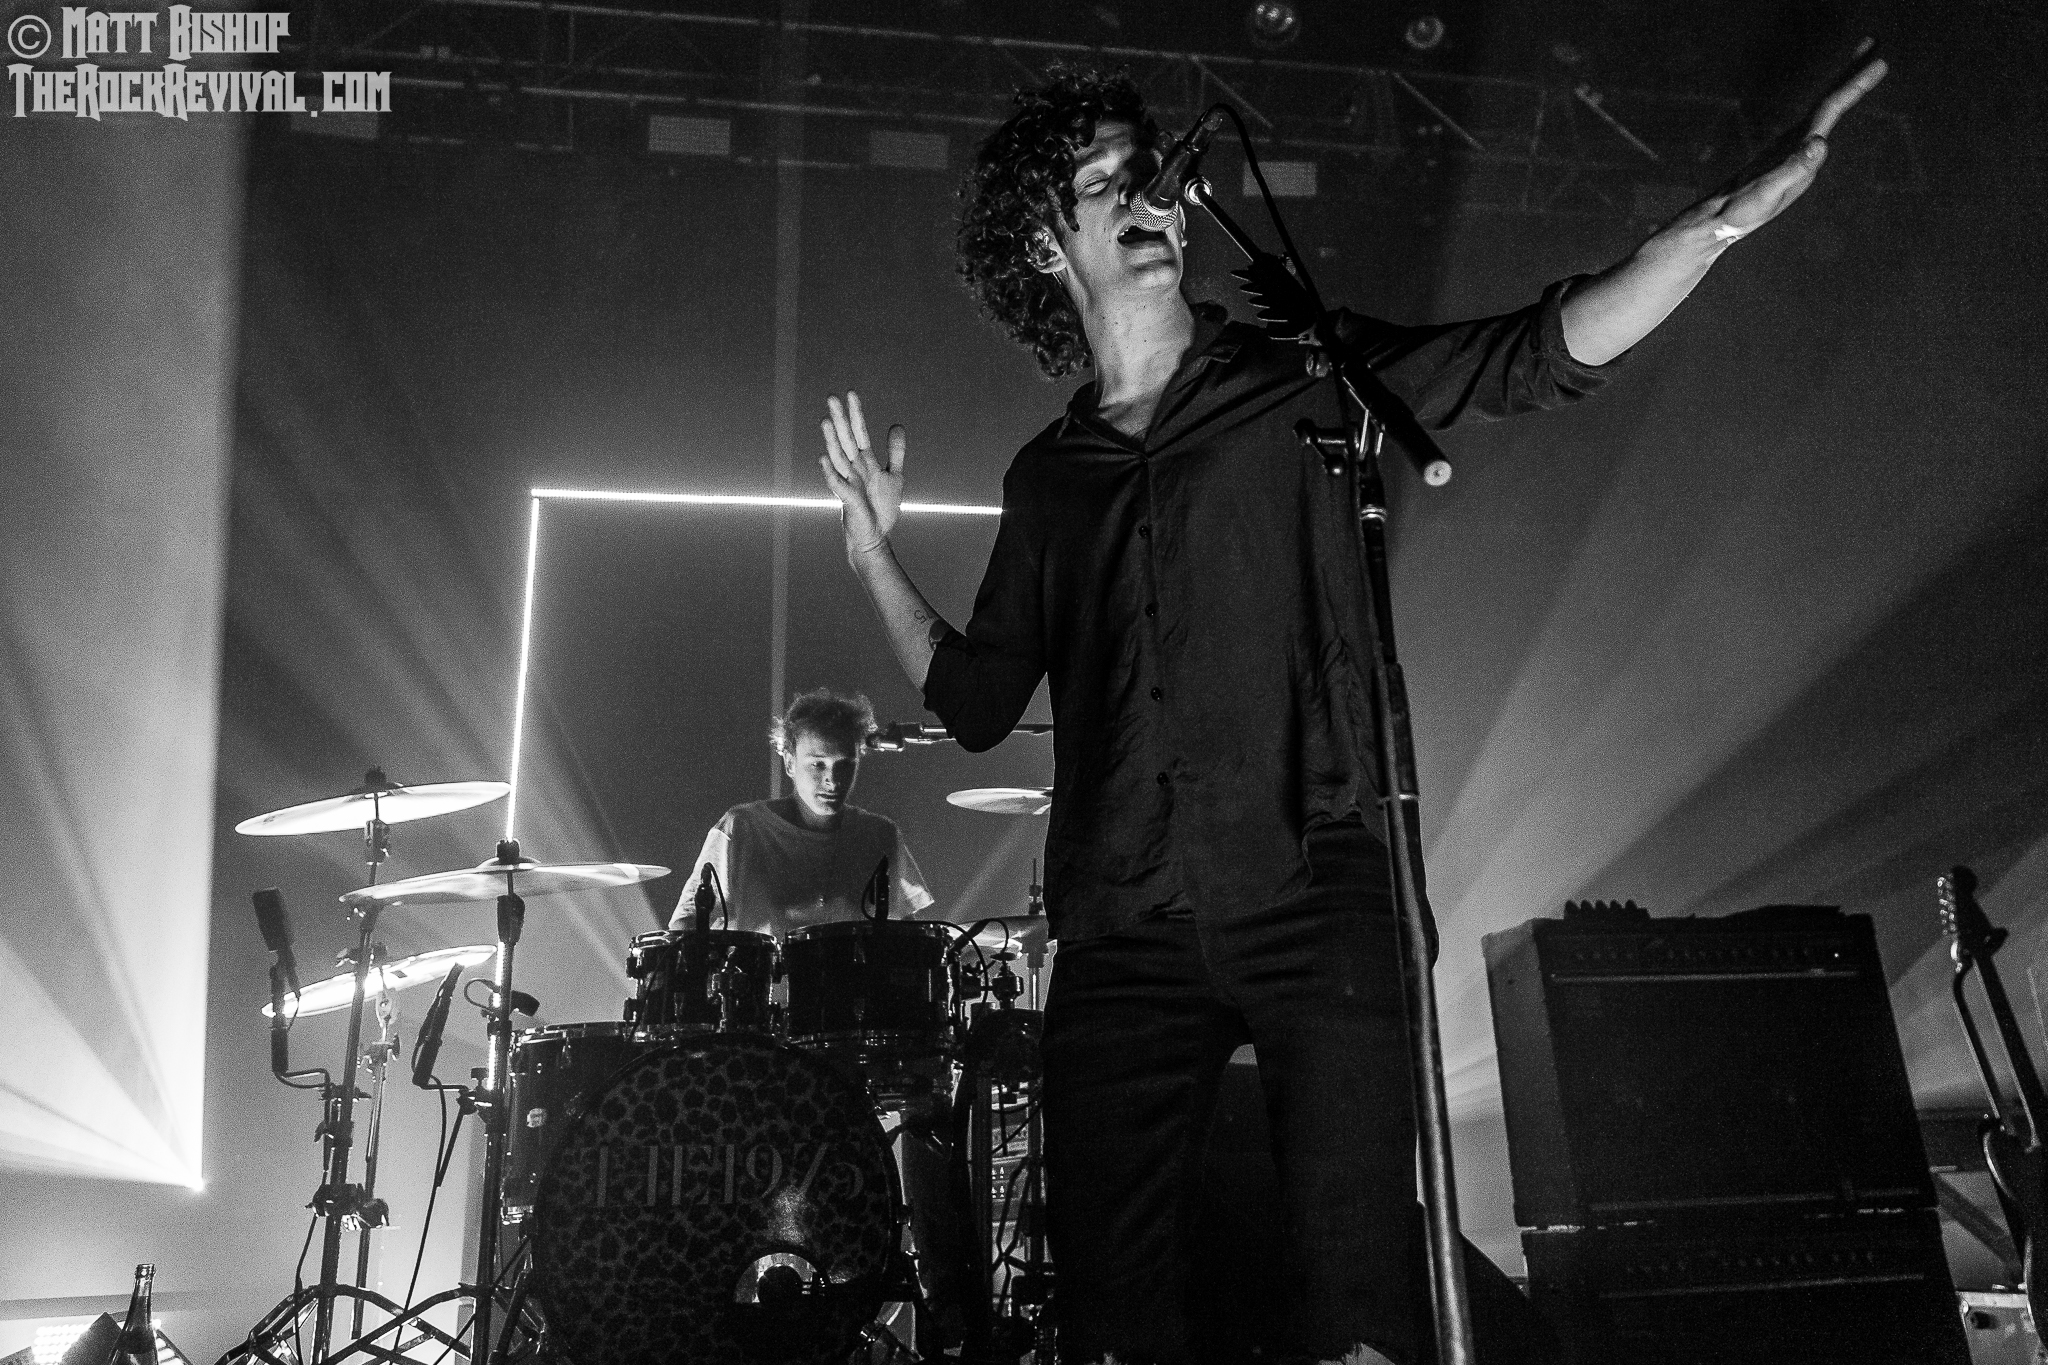 THE 1975 – Live Photo Gallery